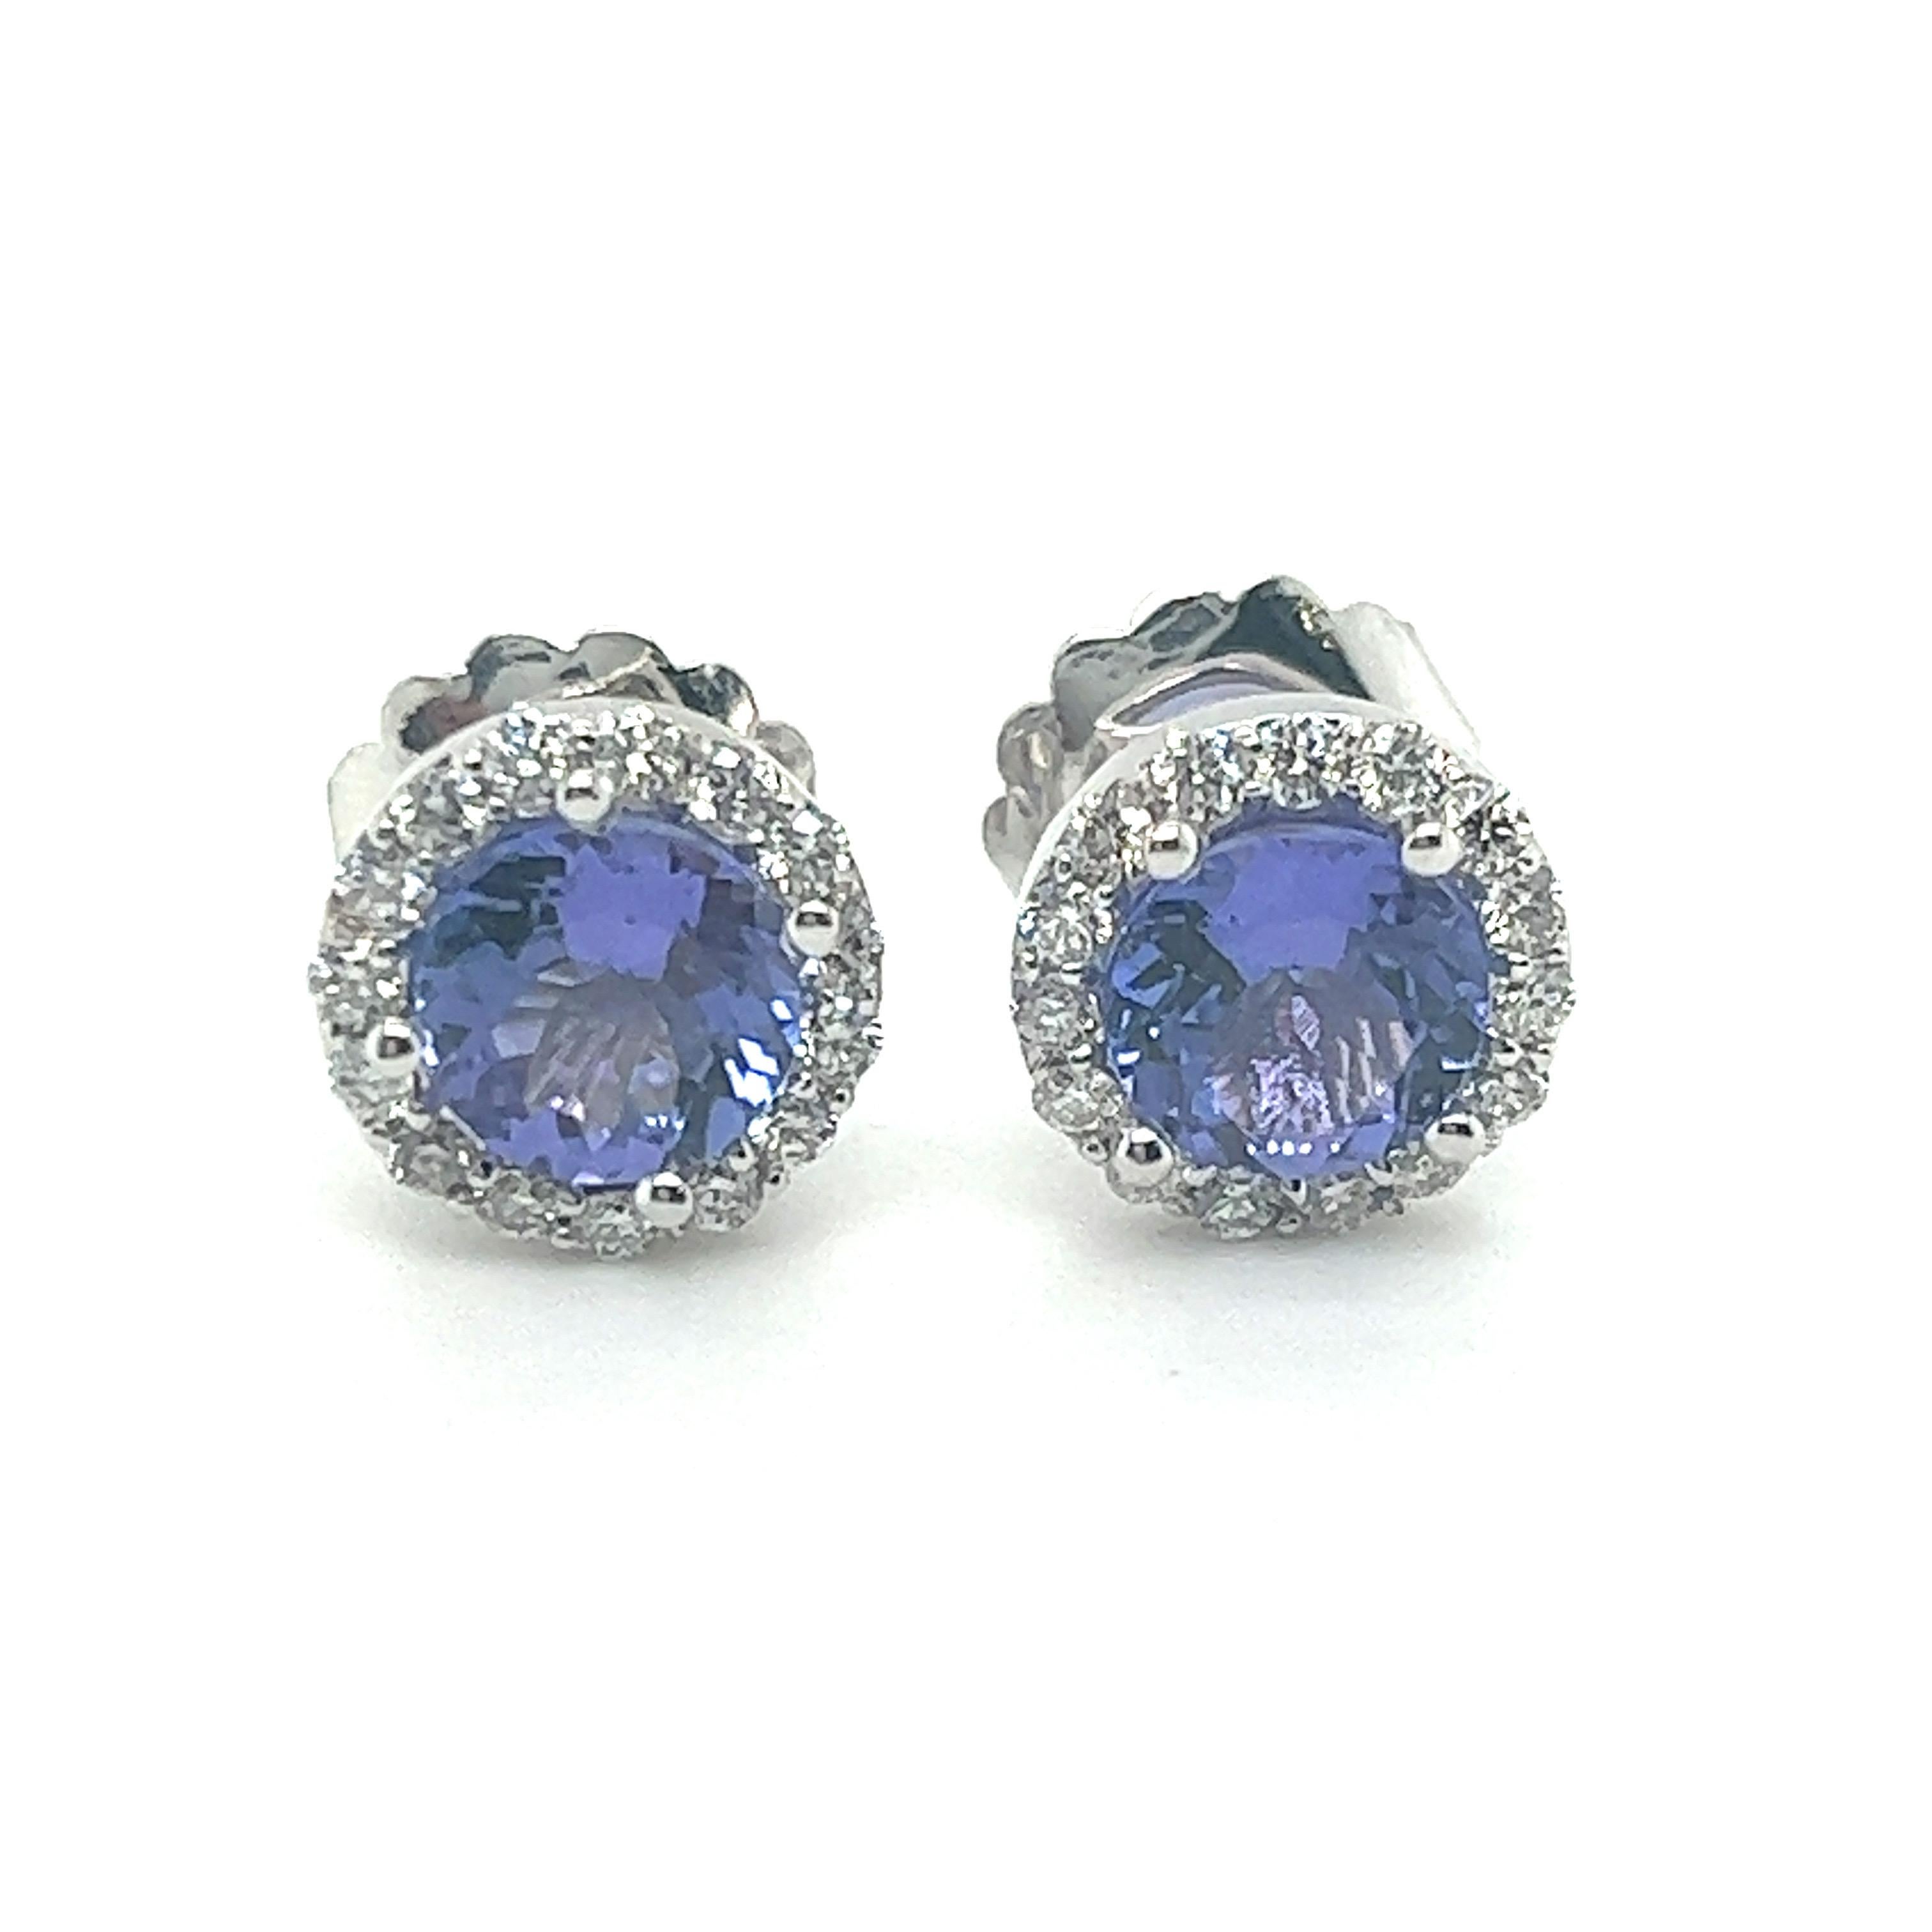 14k white gold Tanzanite Earrings
2.64 carats of Earth Mined Tanzanite 
Center Tanzanite stone is 7mm
.60 carats top quality Earth Mined Diamonds
Entire earring is 10.4mm in Diameter 
Handcrafted in the USA in Miami, FL 

Elegant Tanzanite Earrings,